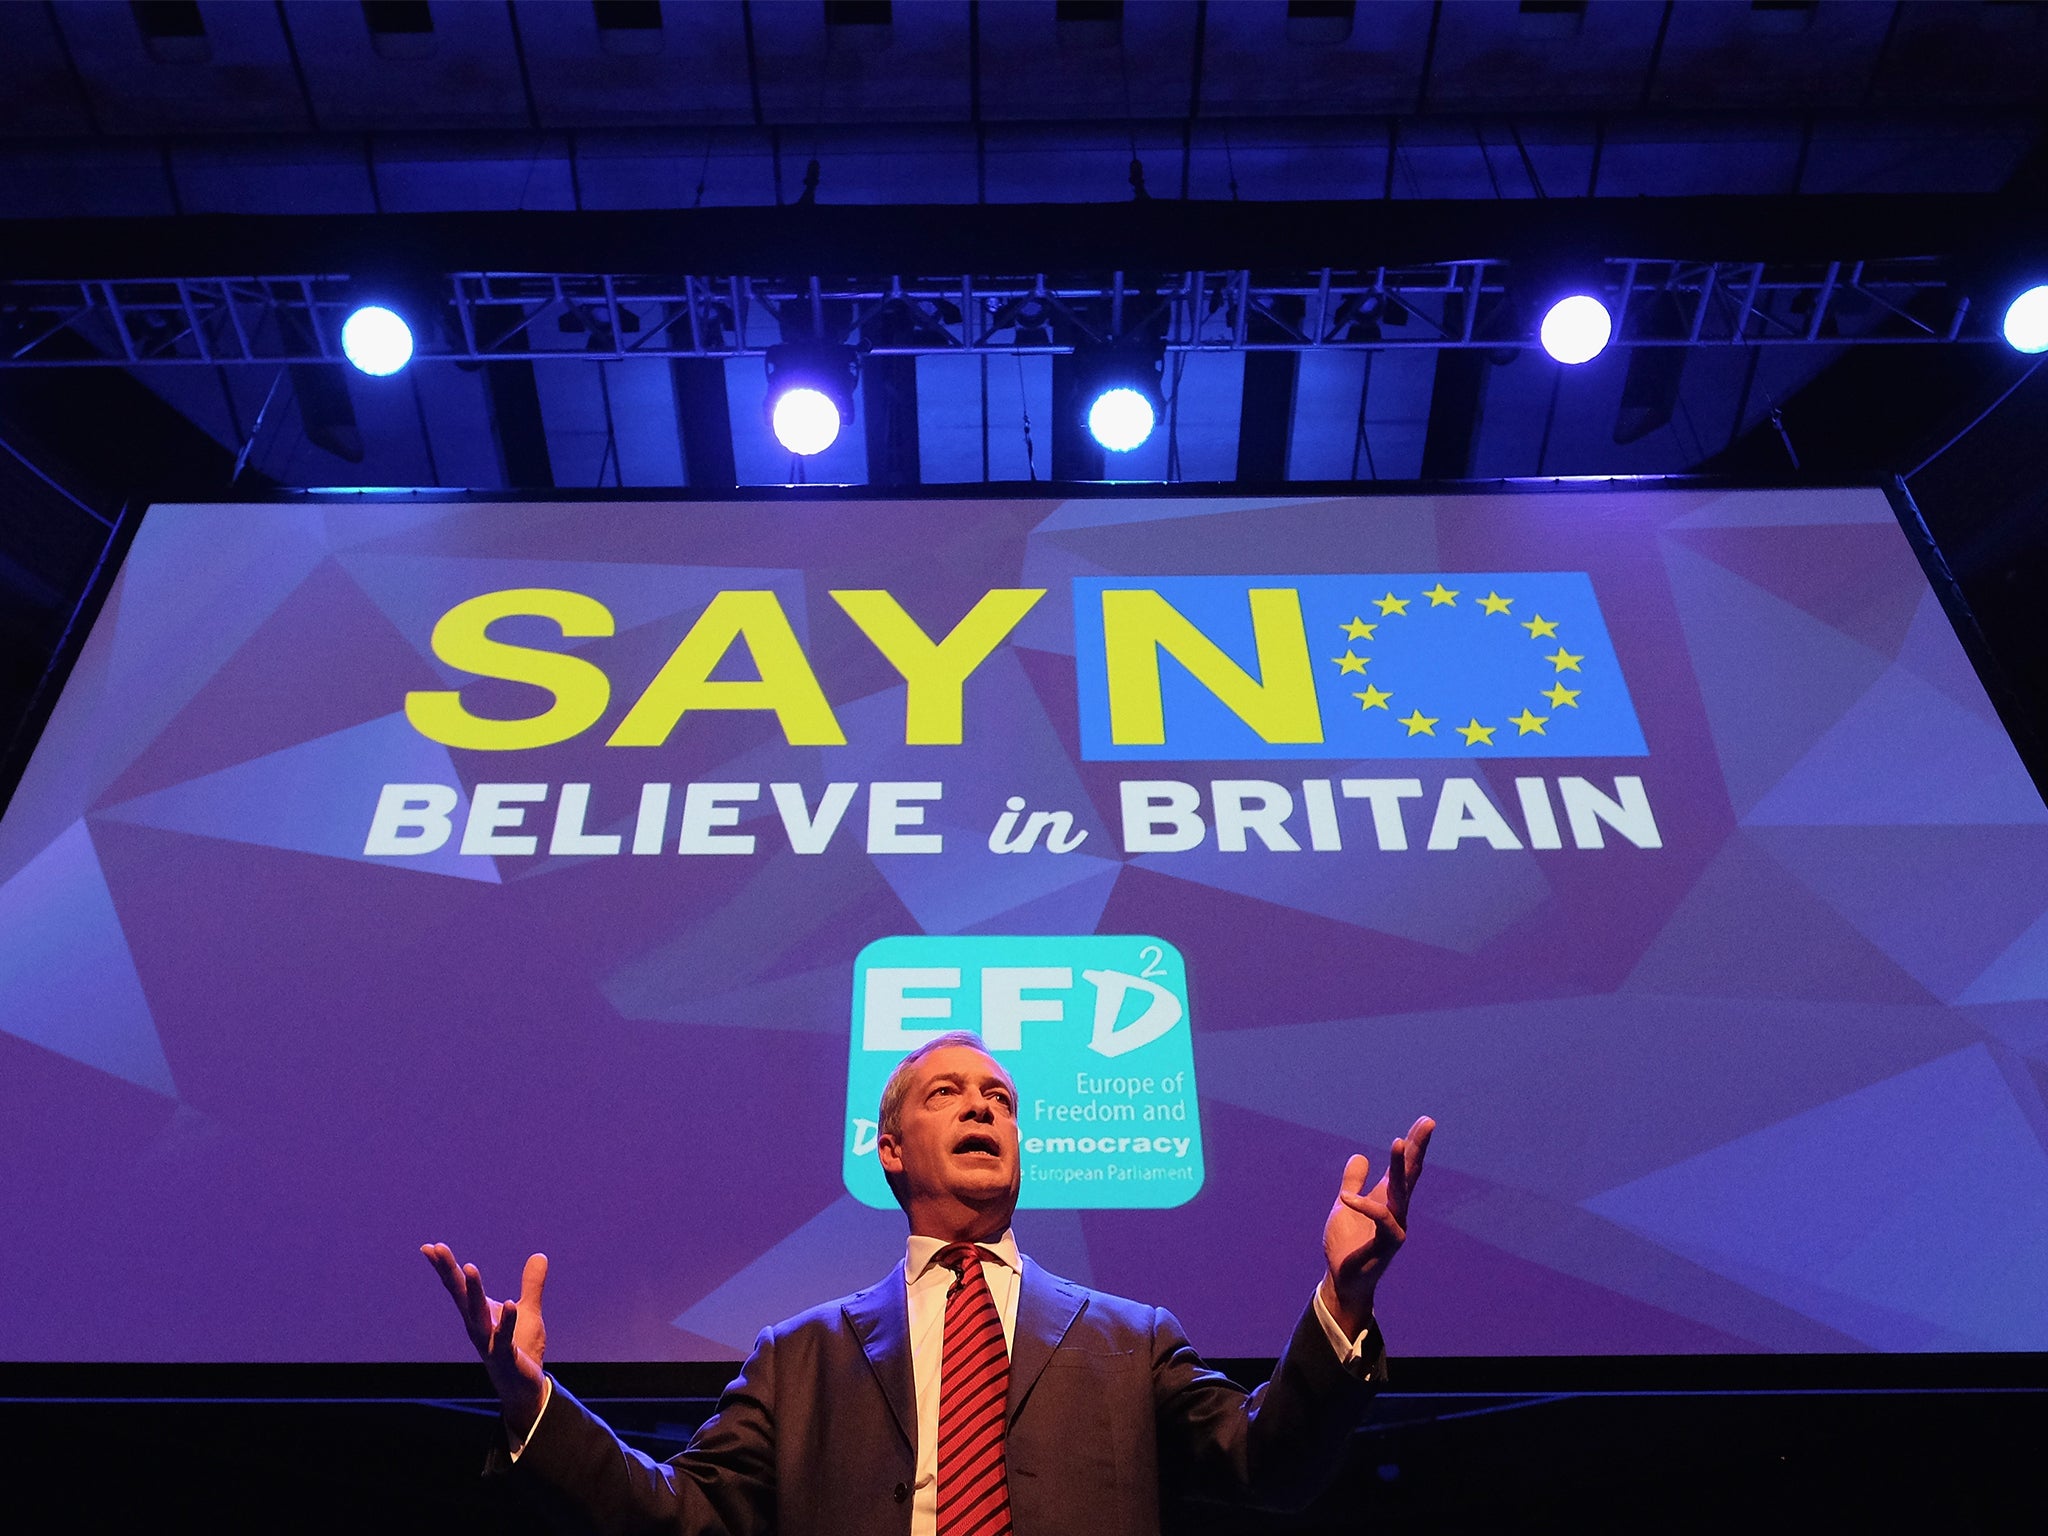 Nigel Farage speaks to supporters and members of the public during a public meeting at the Sage building